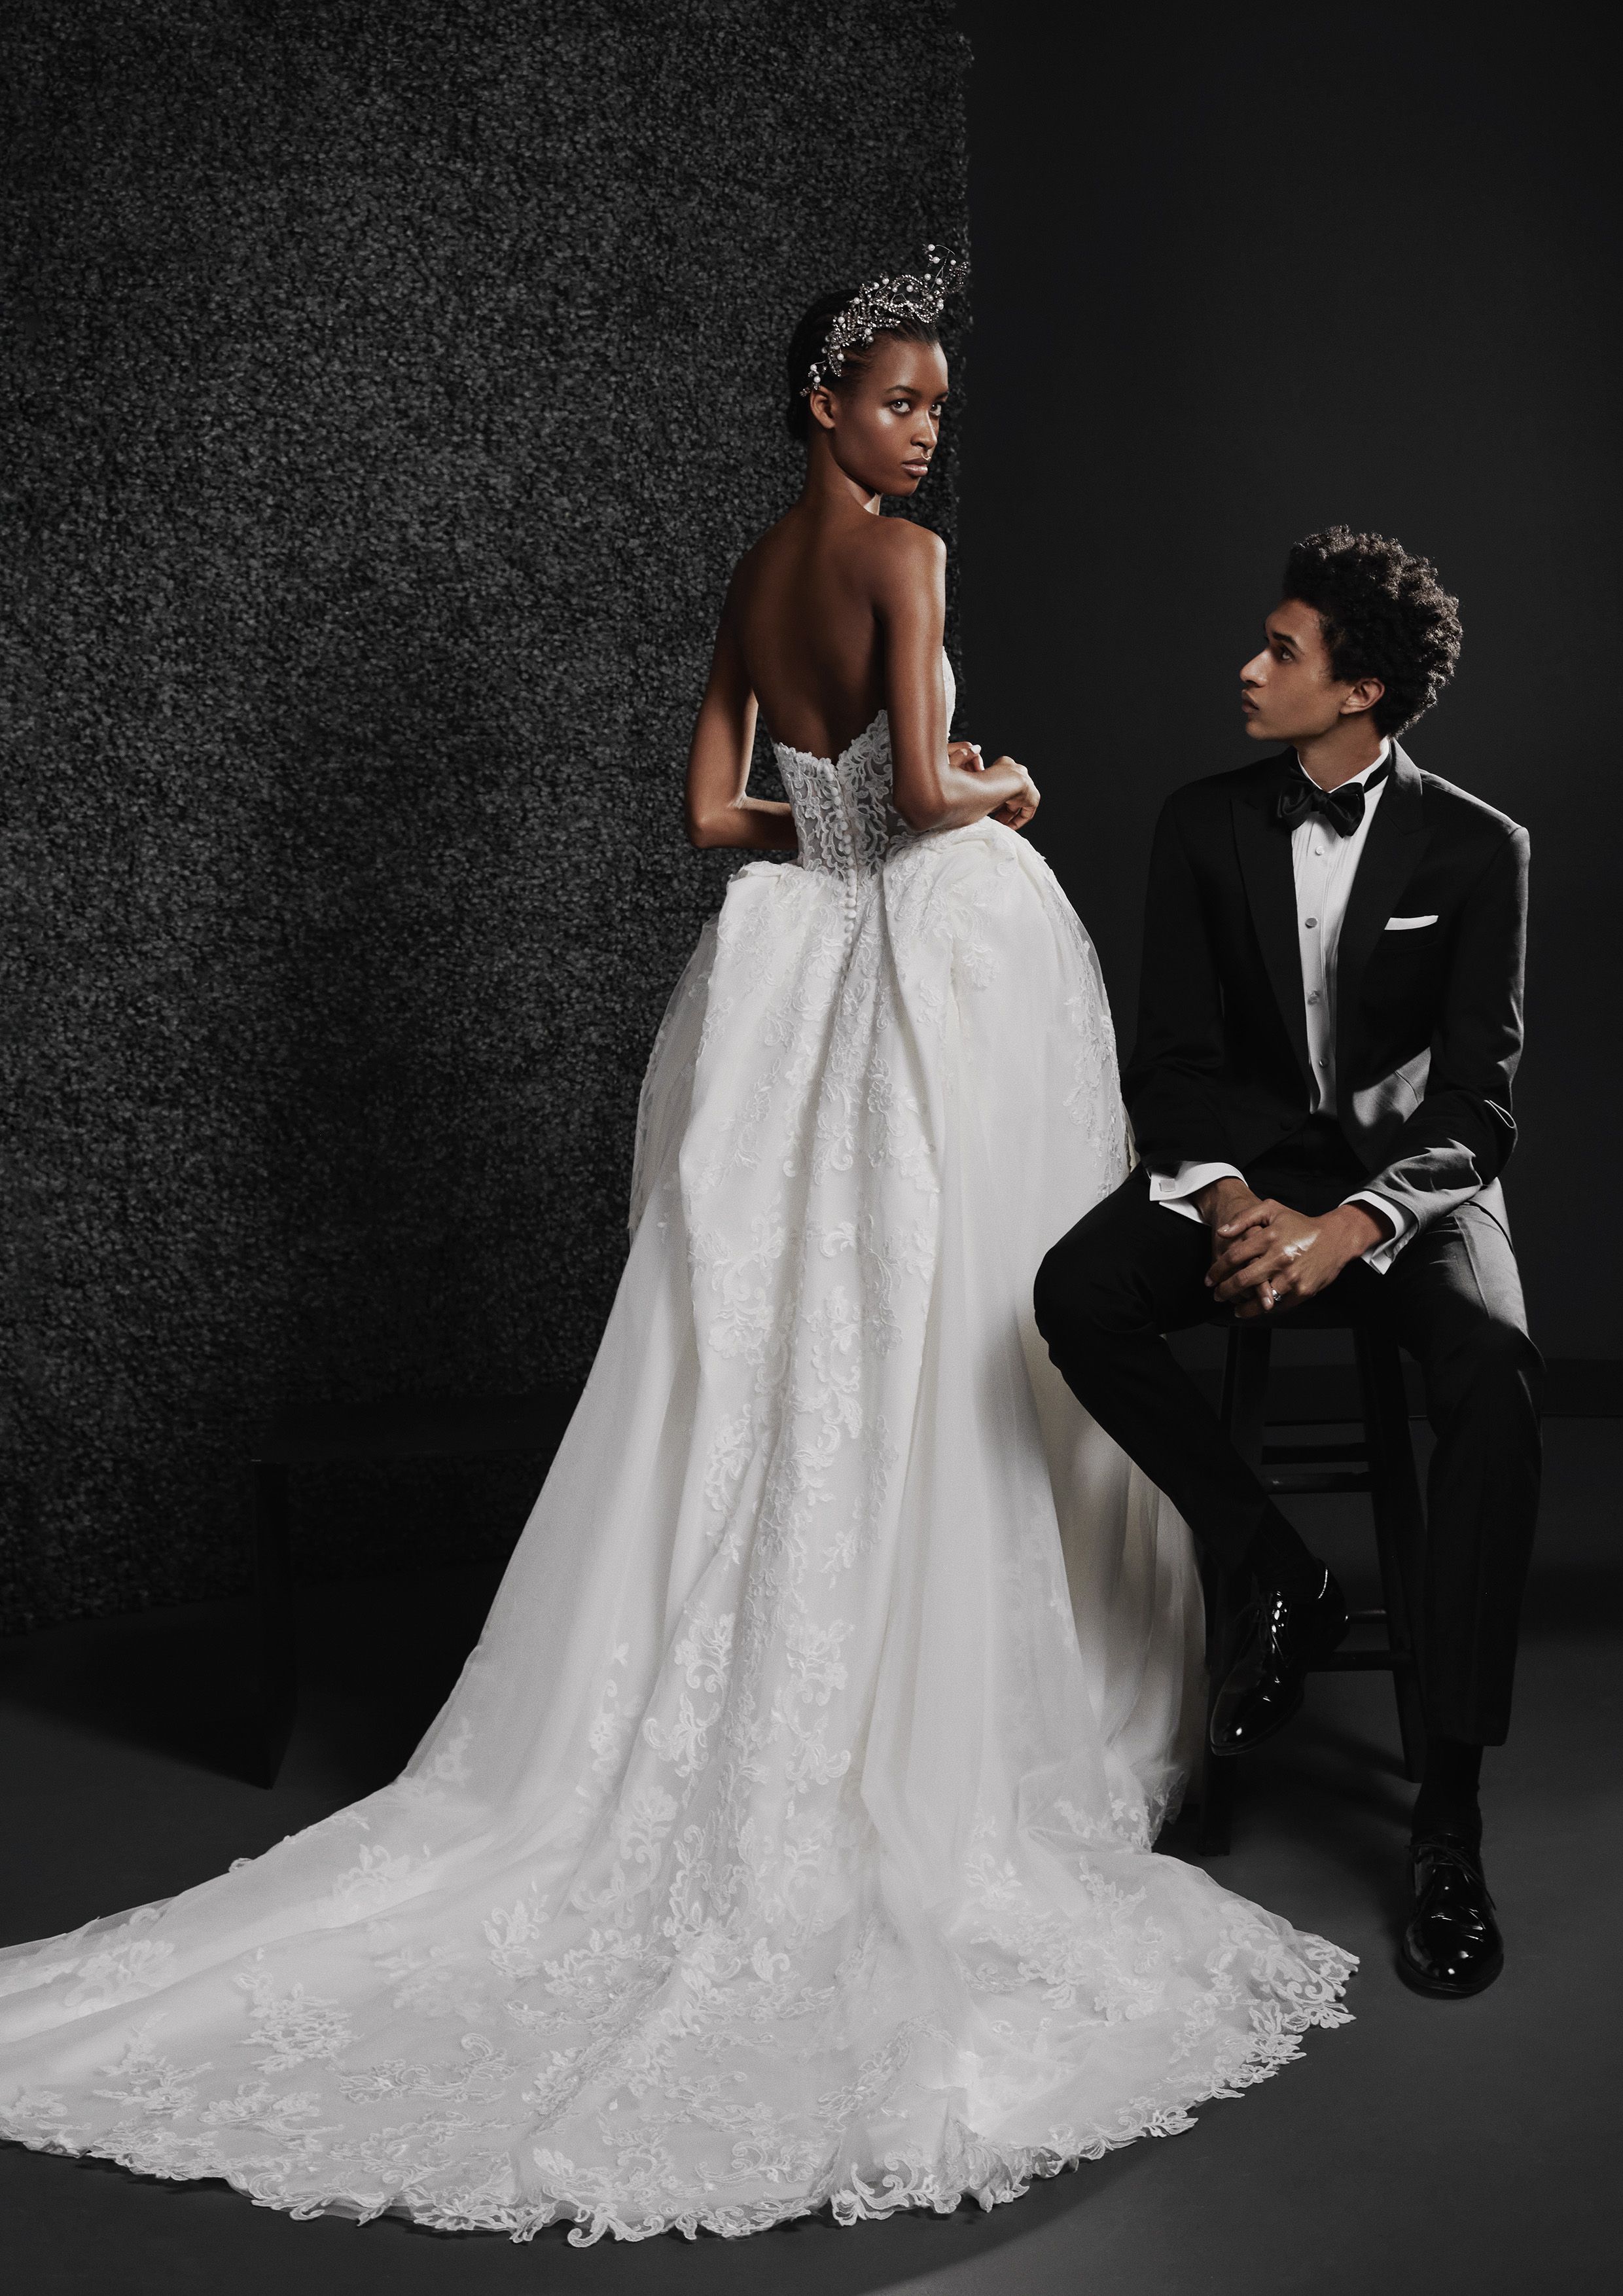 Partnership between Pronovias and Vera Wang results in first 60